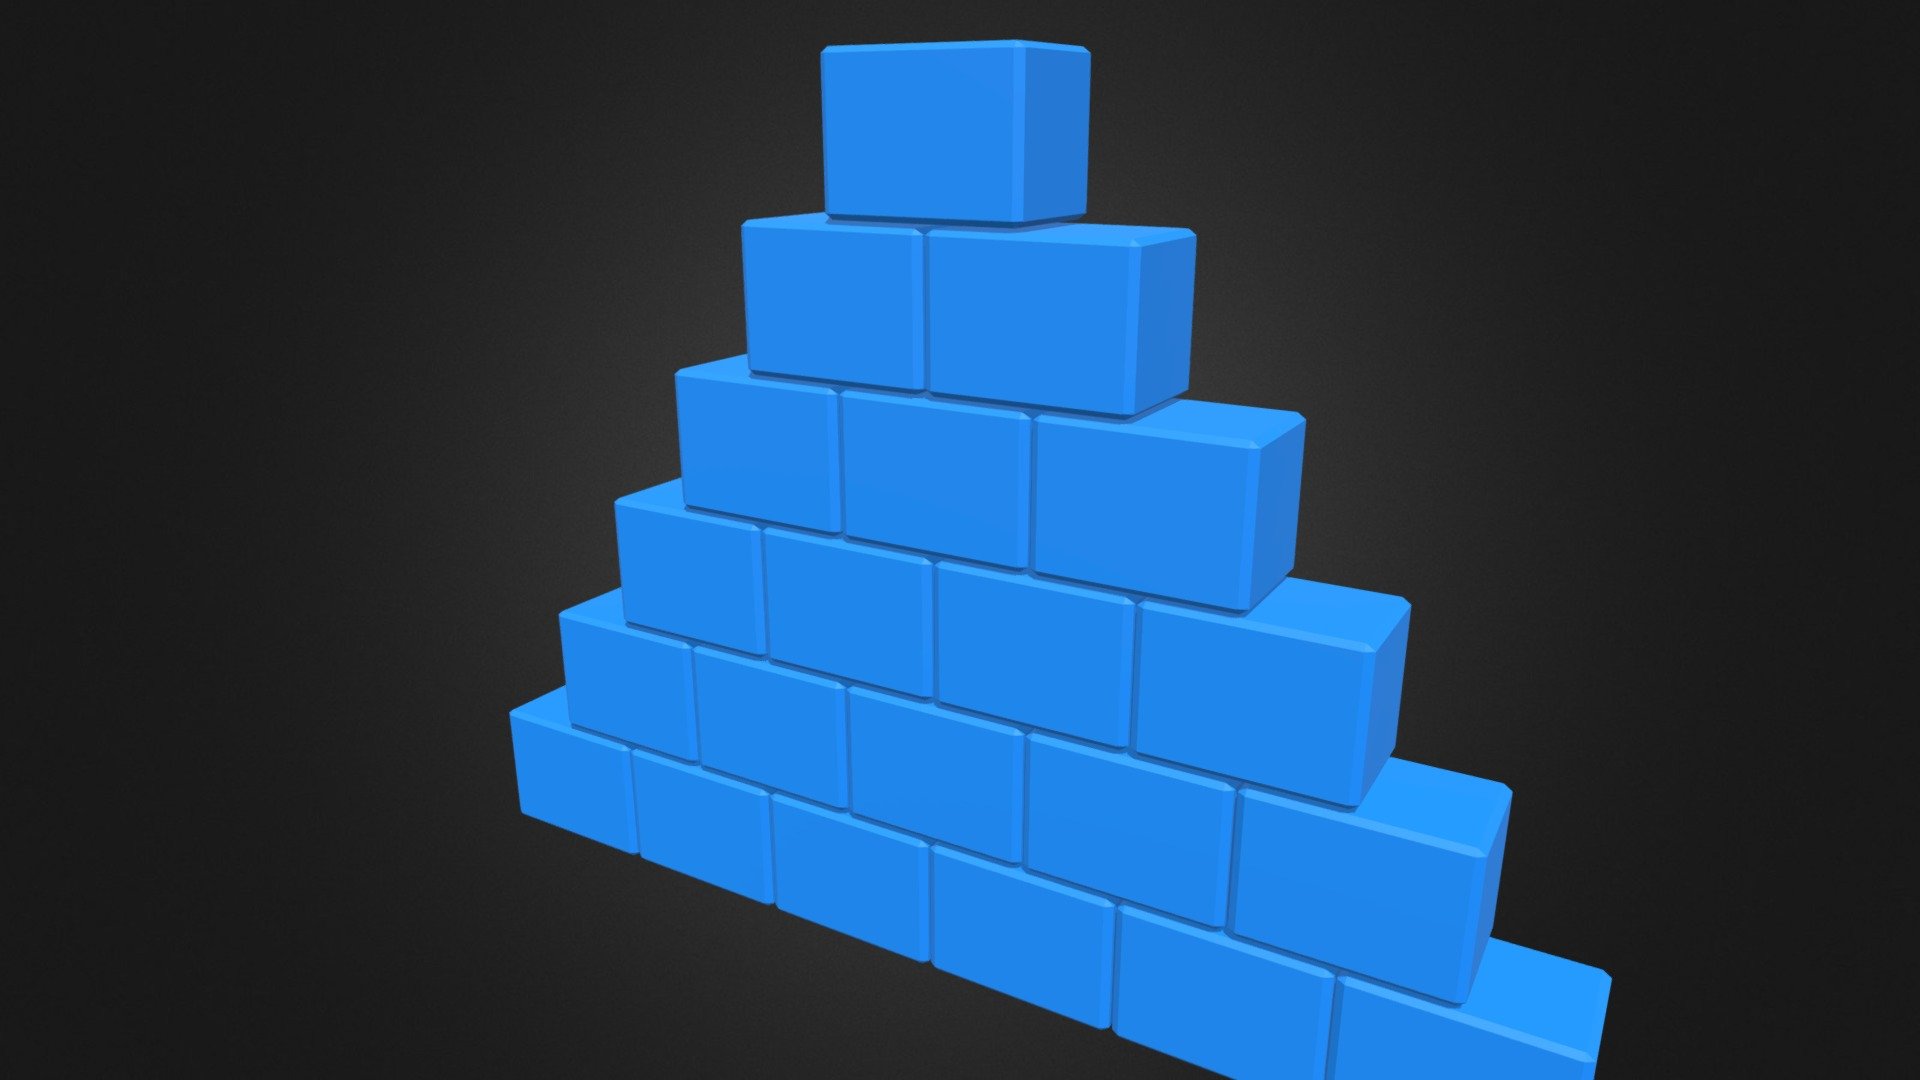 contact for purchase +923149343181 WhatsApp
Blue_Destructible_Fs22_Blocks_Gameready_3D_Block_Model, Suitable for Beamng, Specially for FS22(i3D Gameready FS22) and Importable for any 3D Software. Thanks

youtube(video of blocks)❤️
https://youtu.be/Pt8Bv0F6et8 - Blue_Destructible_Fs22_Blocks - 3D model by saqlain (@mirzabaig4445) 3d model